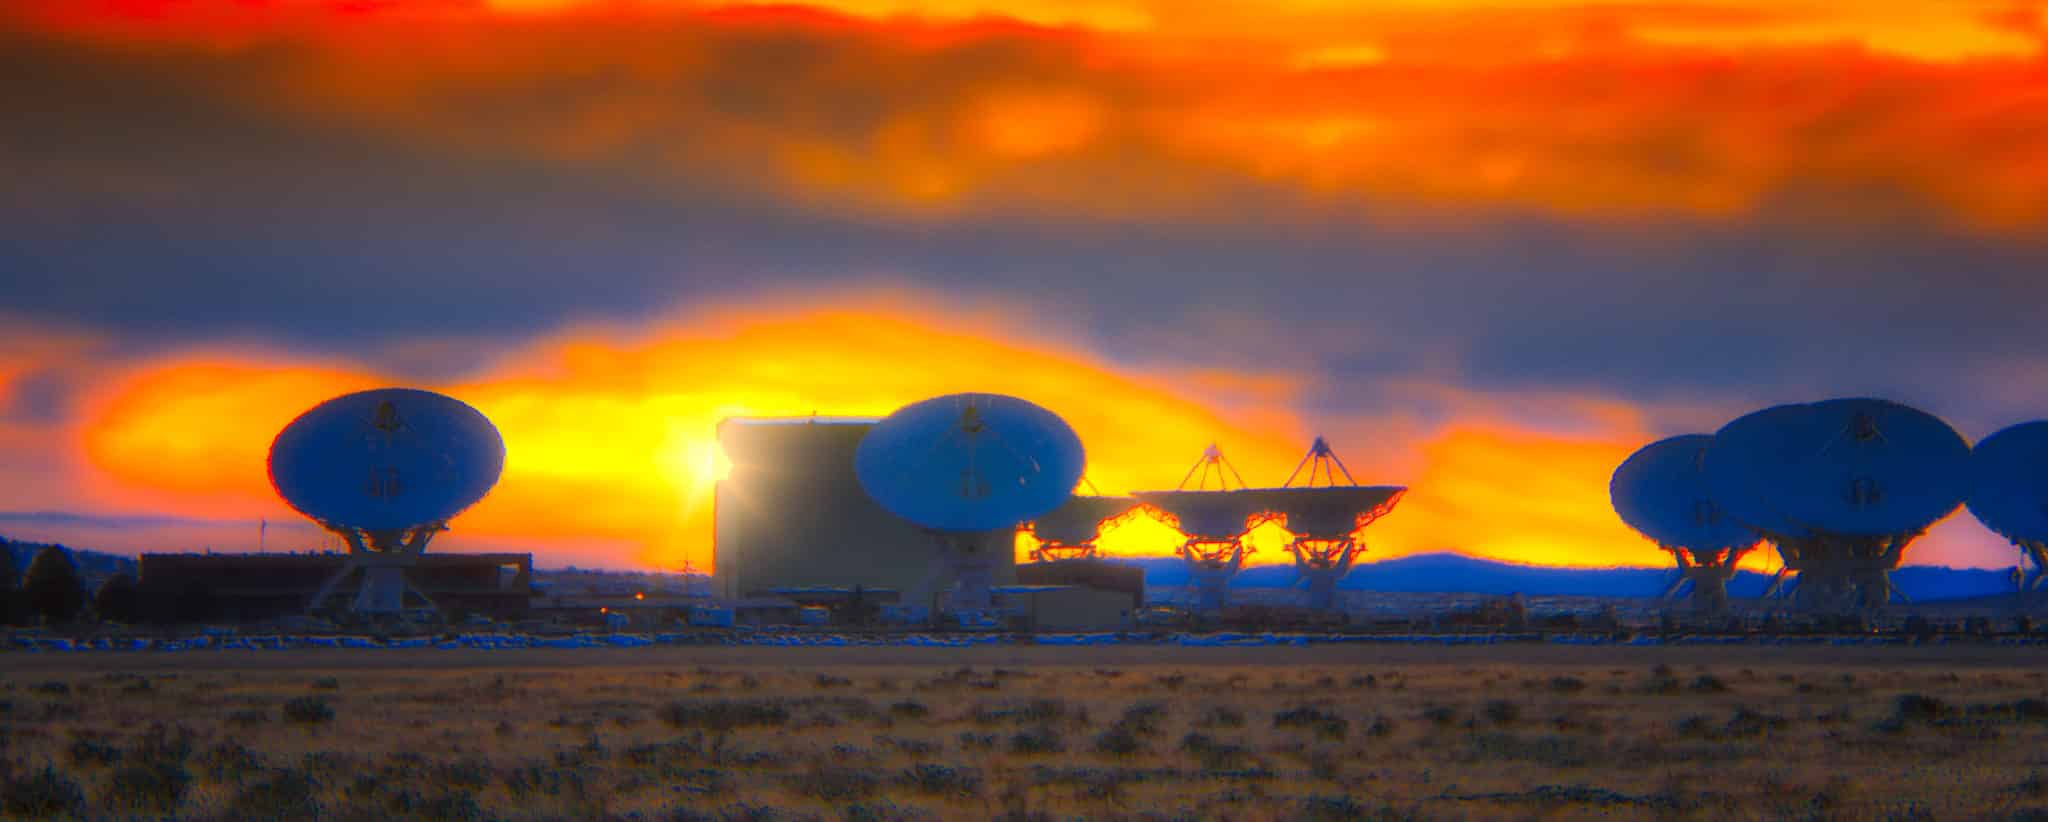 Antennae of the Very Large Array radio observatory, west of Socorro, New Mexico, at sunset.